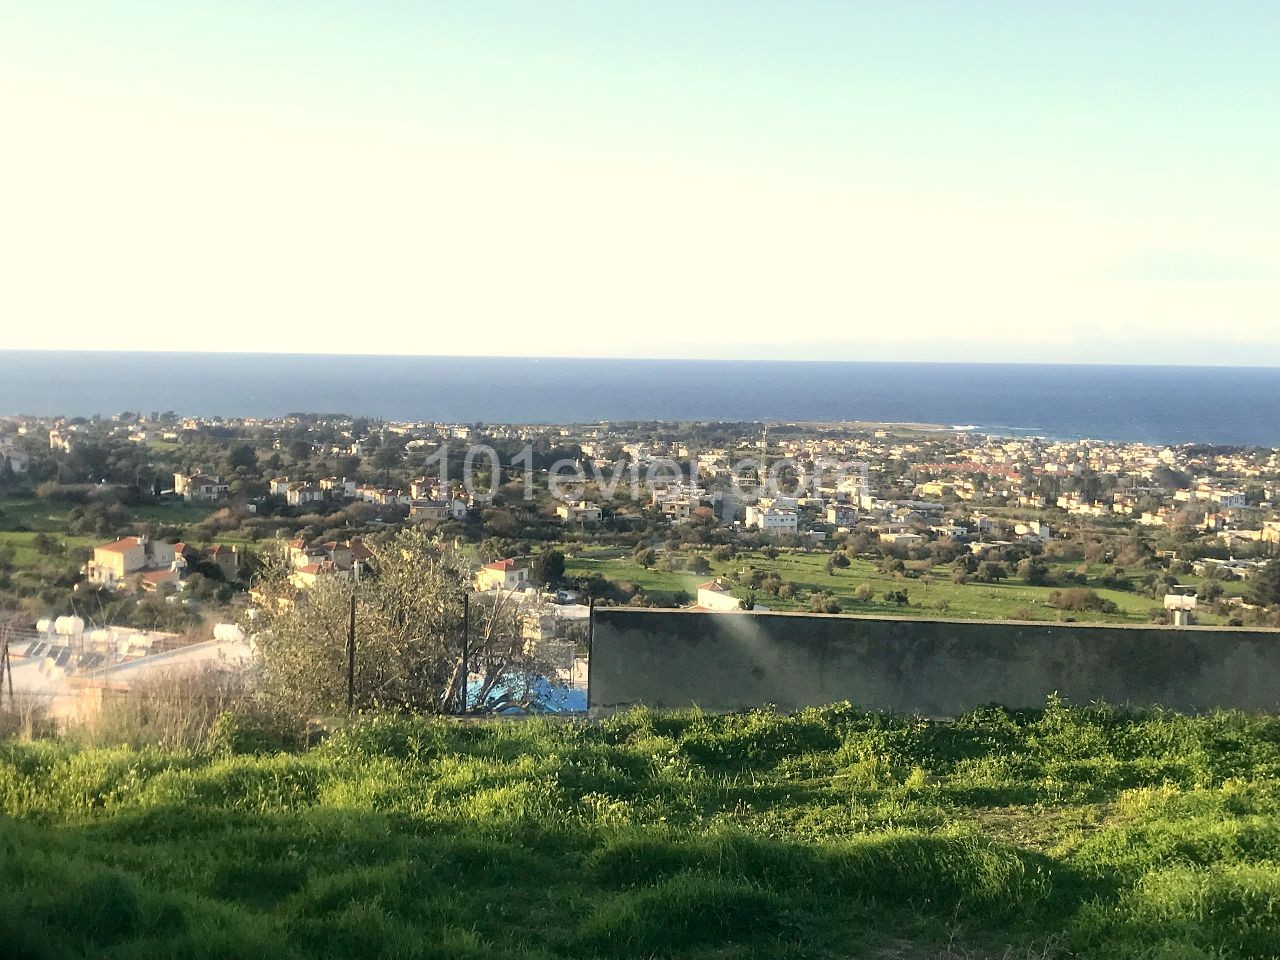 1 decare 1 evlek land in Girne Karşıyaka with Turkish title deed, 90% construction with uninterrupted view. 05338403555 ** 